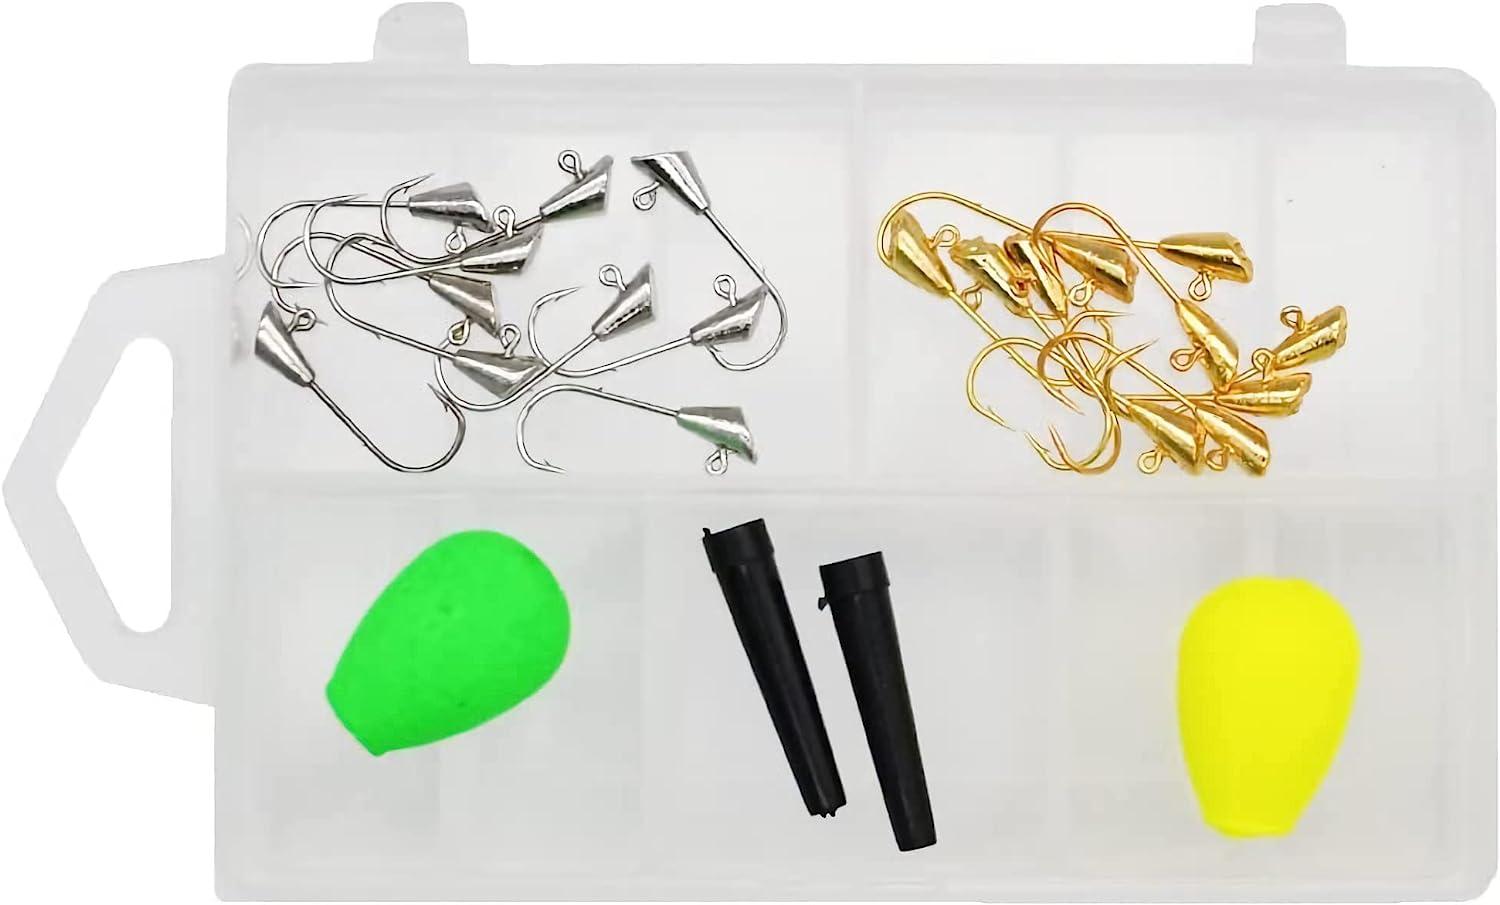 Trout Magnet Original 142 Piece Kit, Fishing Equipment and Accessories, 20  Hooks, 120 Bodies, 2 Floats, Lure Kits -  Canada